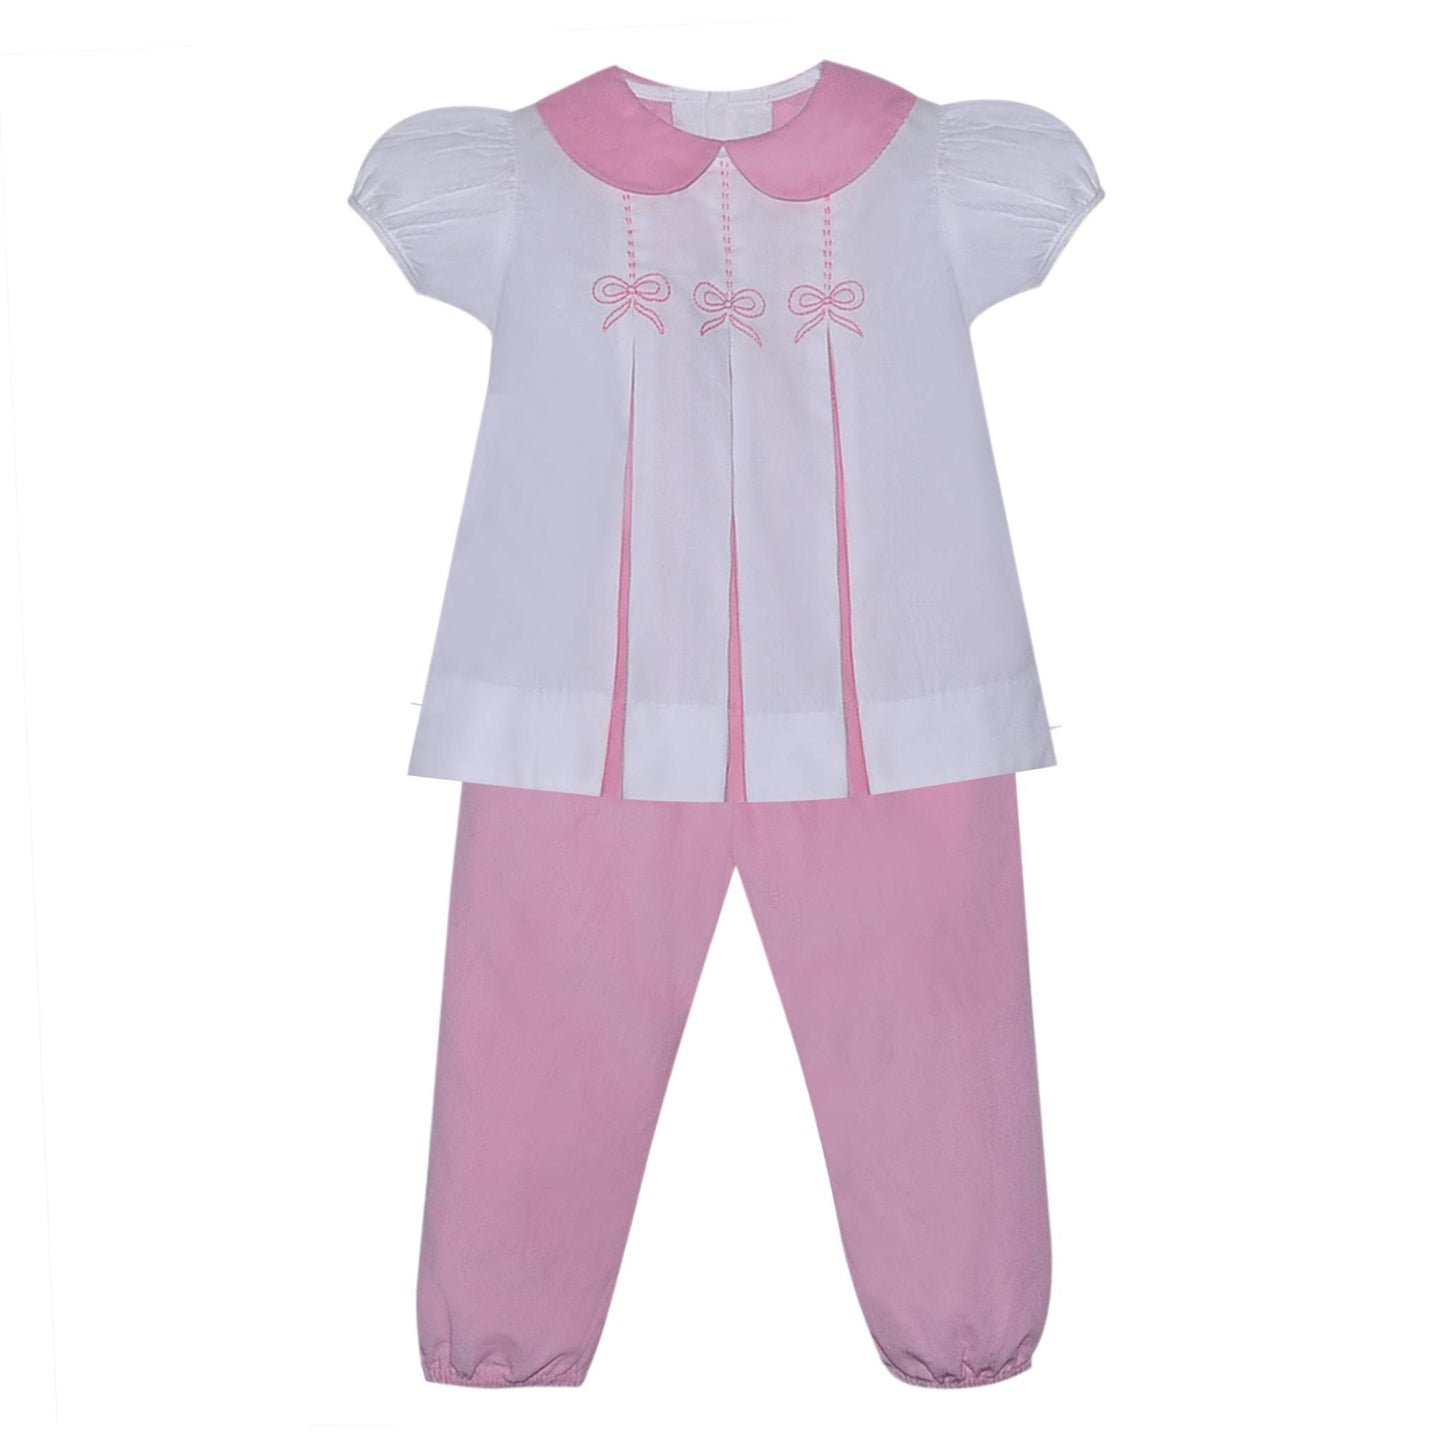 Reese Long Bloomer Set with Bow Embroidery - FINAL SALE